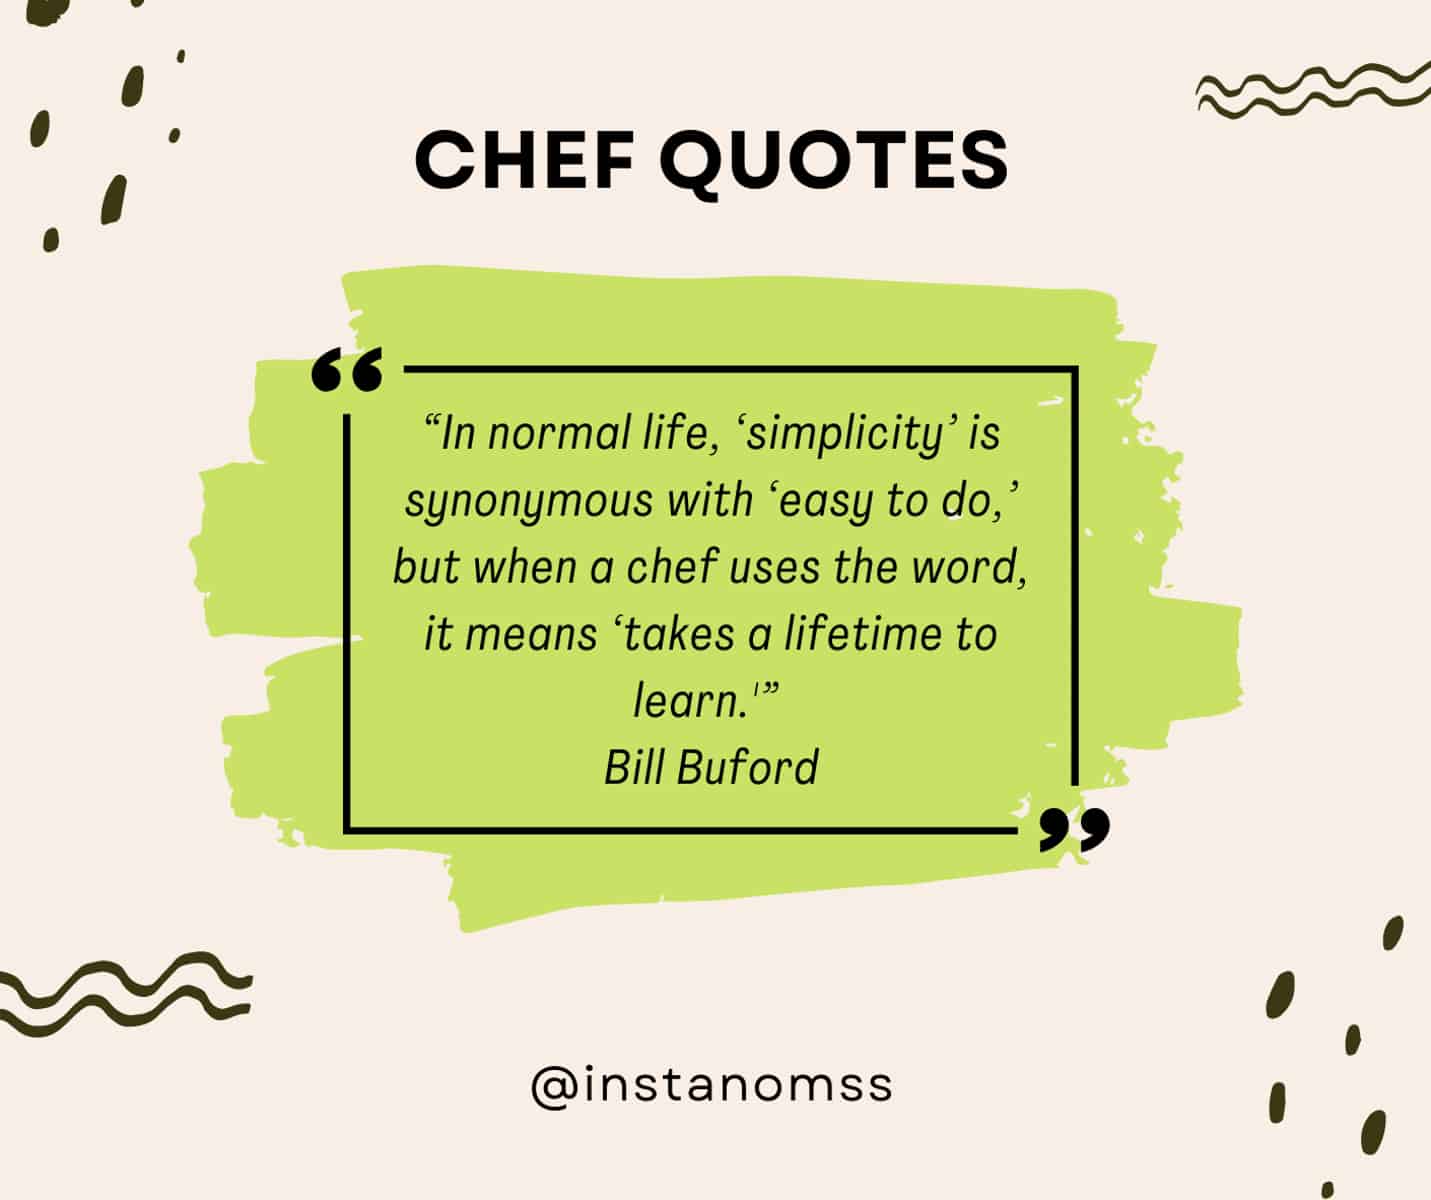 “In normal life, ‘simplicity’ is synonymous with ‘easy to do,’ but when a chef uses the word, it means ‘takes a lifetime to learn.'” Bill Buford